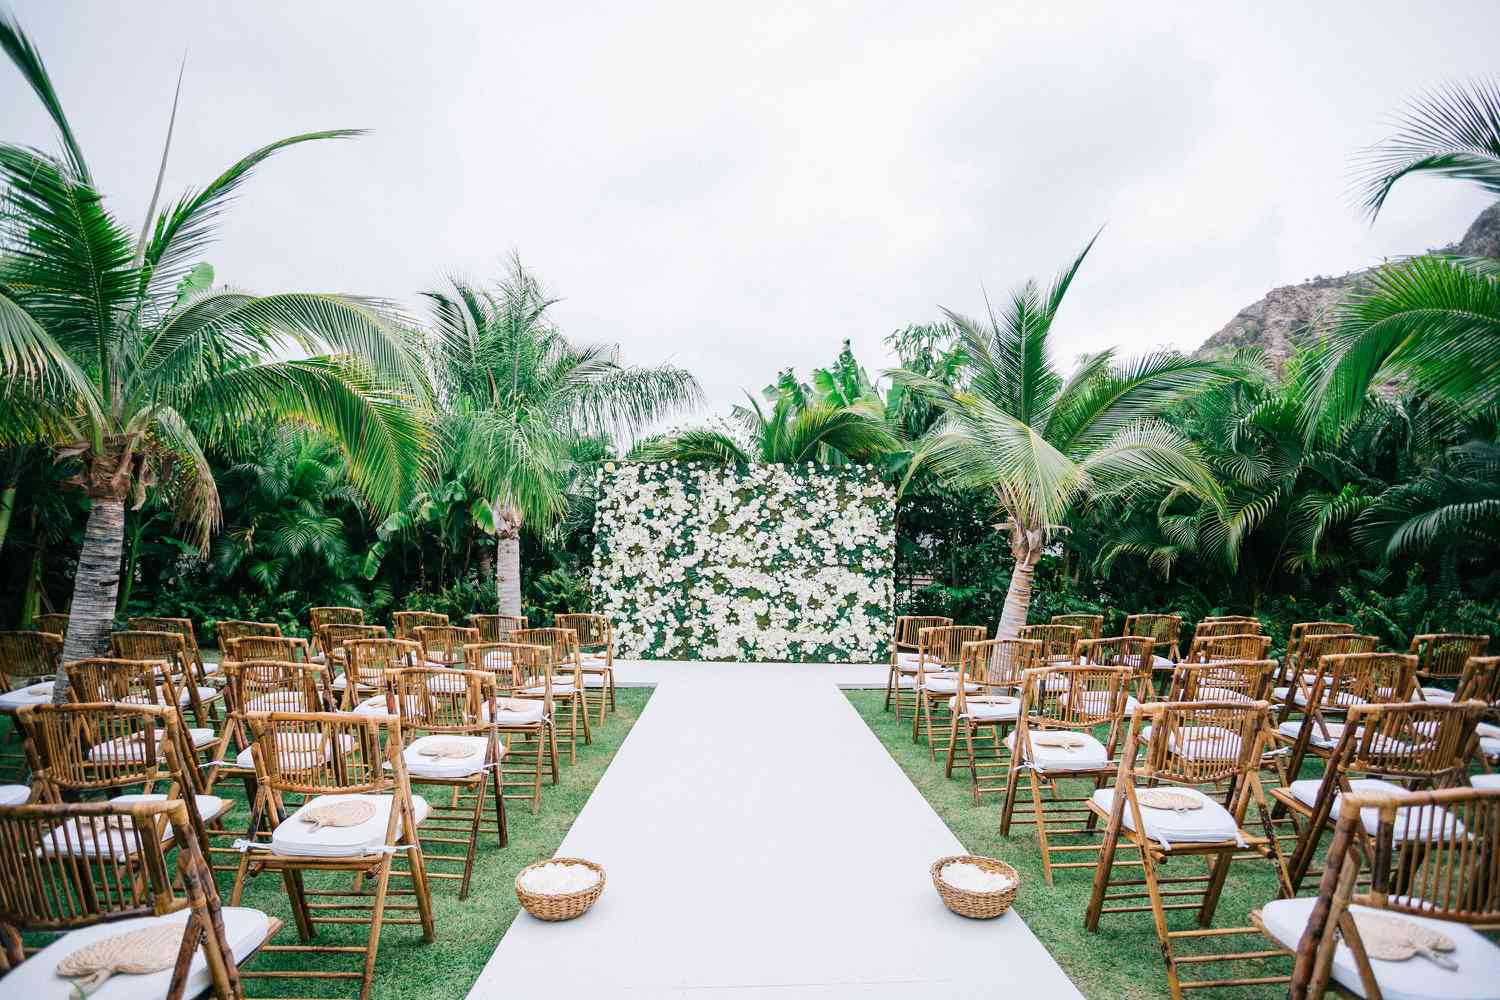 Ceremony venue with white runner on grass